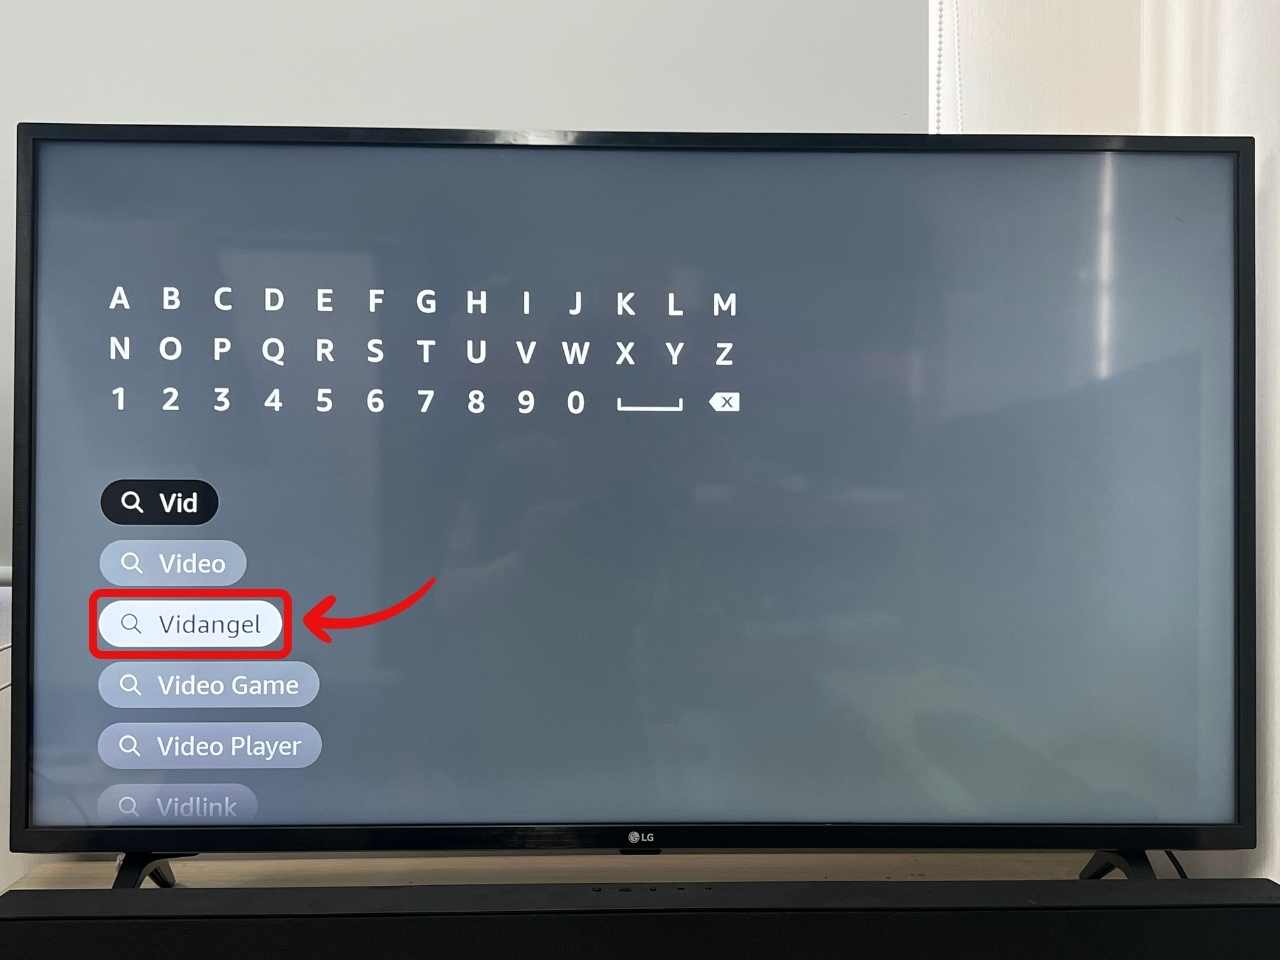 Search UI of Fire TV Stick